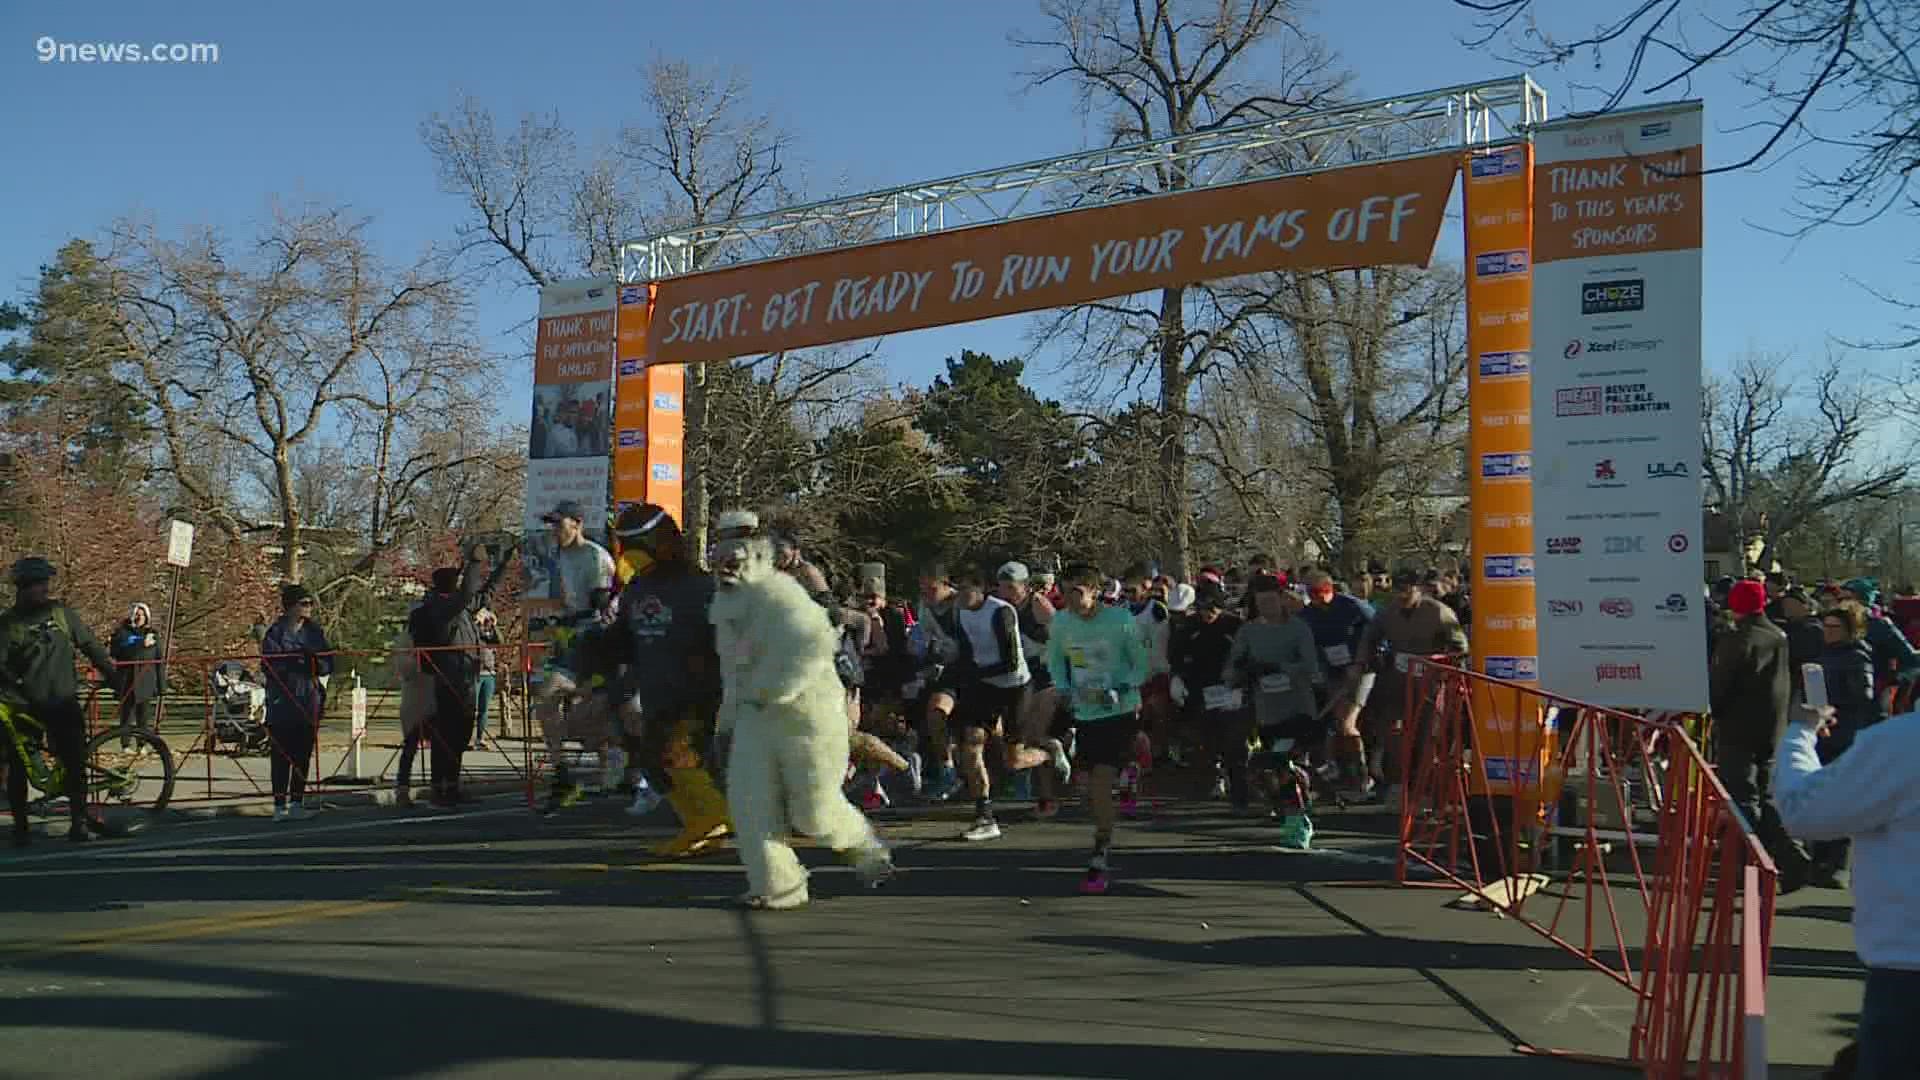 There were plenty of costumes in the crowd of people who showed up for the race, which has been a Thanksgiving tradition for more than 45 years.